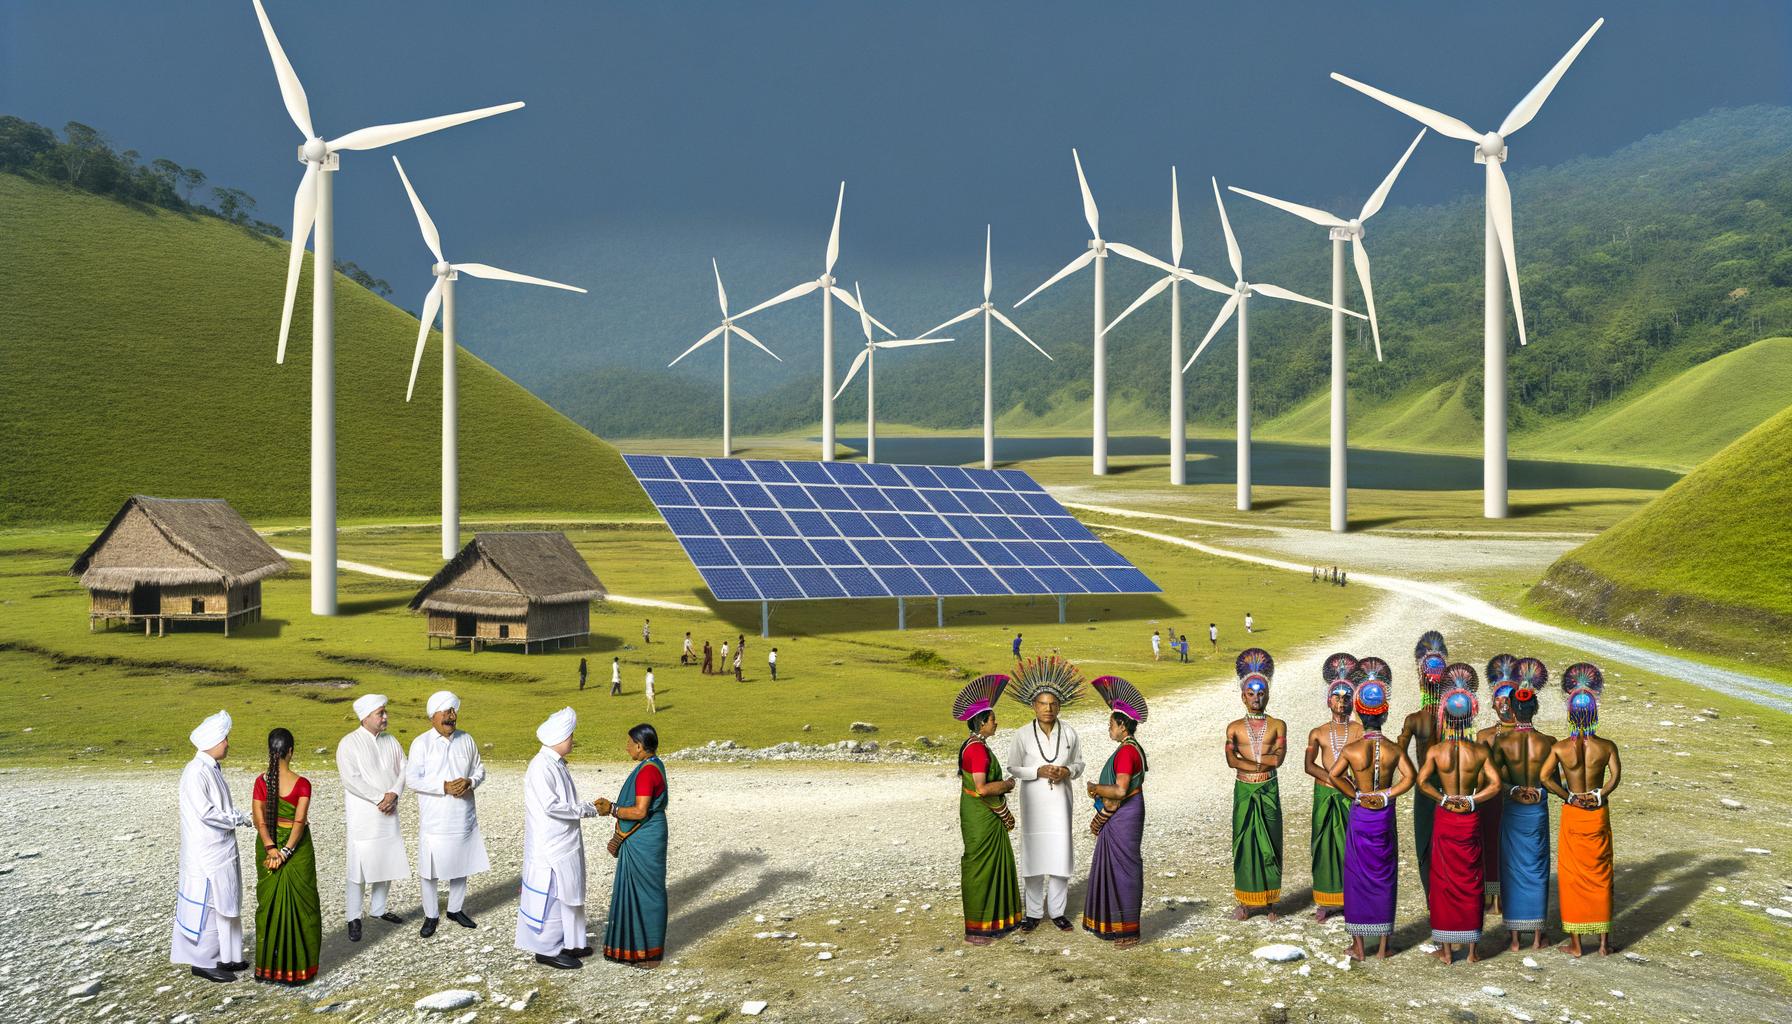 Indigenous rights versus green energy investment, causing significant conflicts globally.